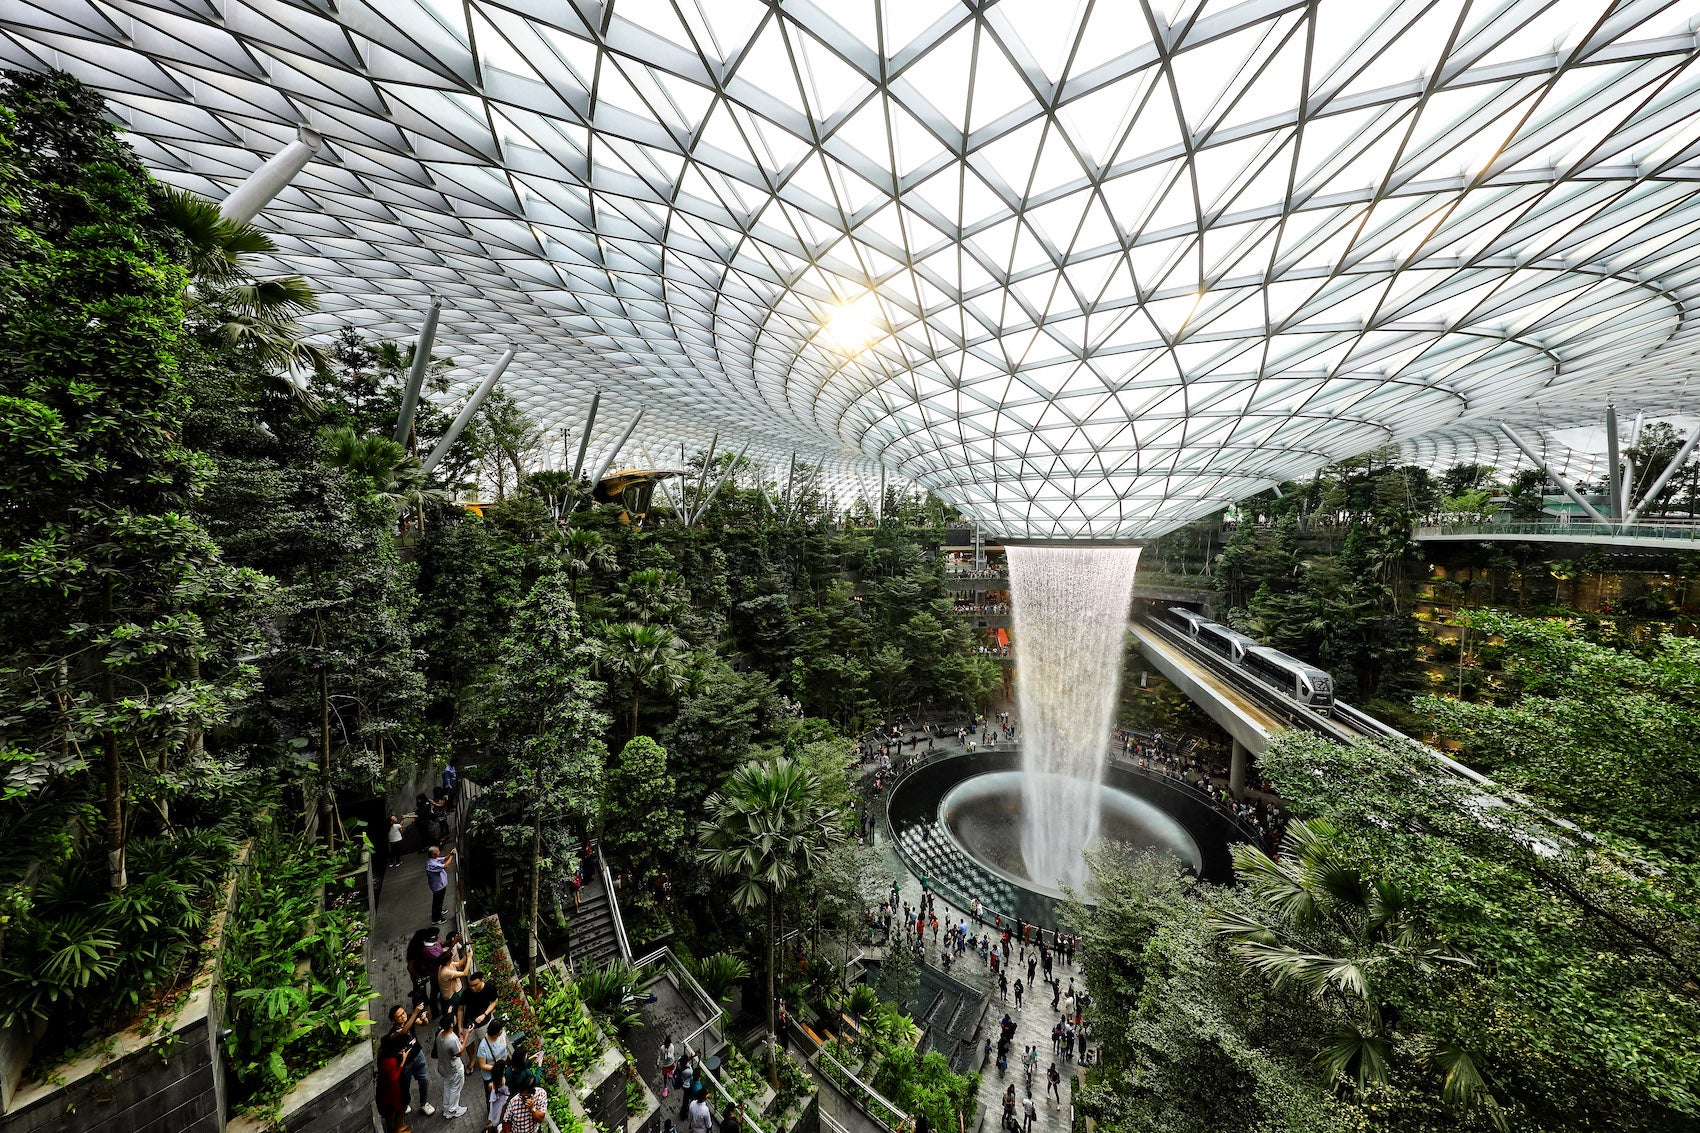 Singapore Airport Launches Free City Tours For Travelers - Travel Off Path